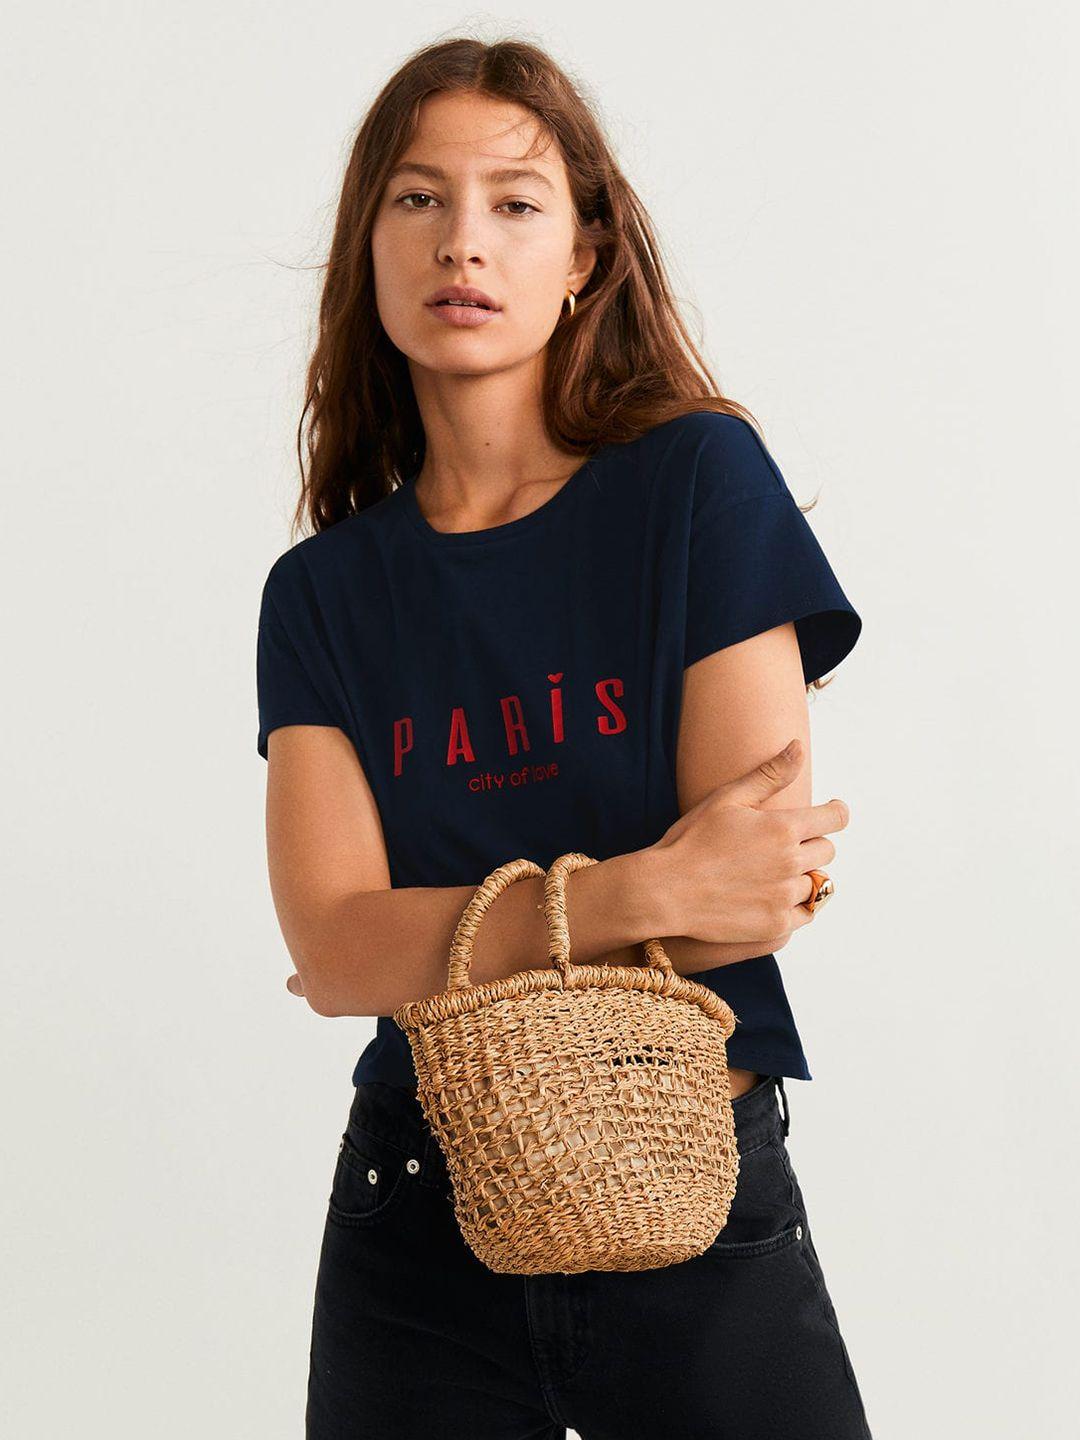 mango-women-navy-blue-&-red-printed-detail-pure-cotton-top